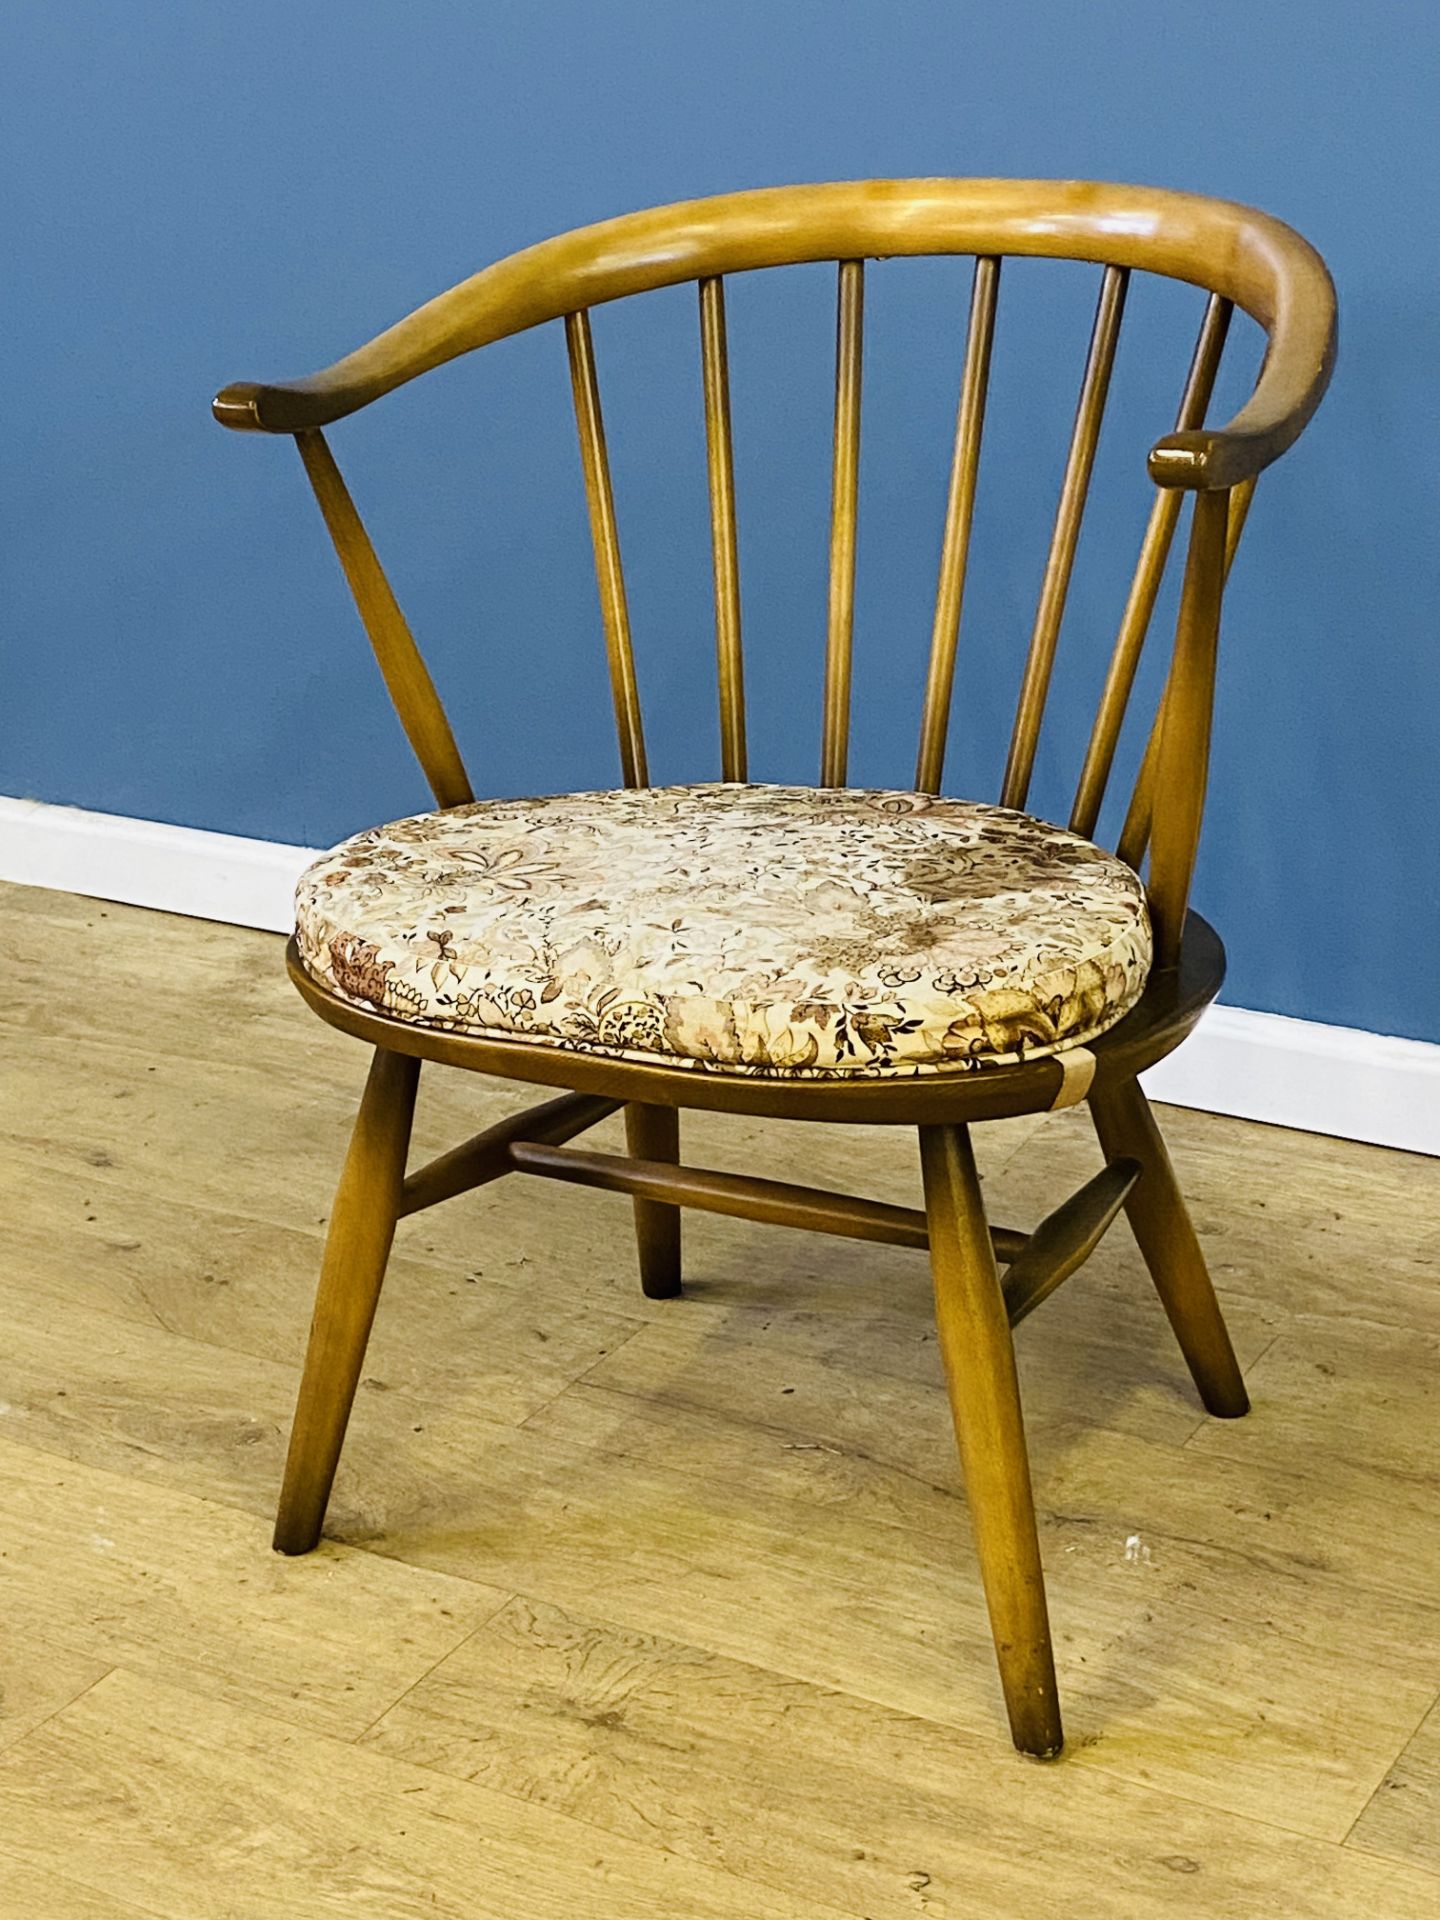 Ercol spindle back armchair - Image 2 of 4